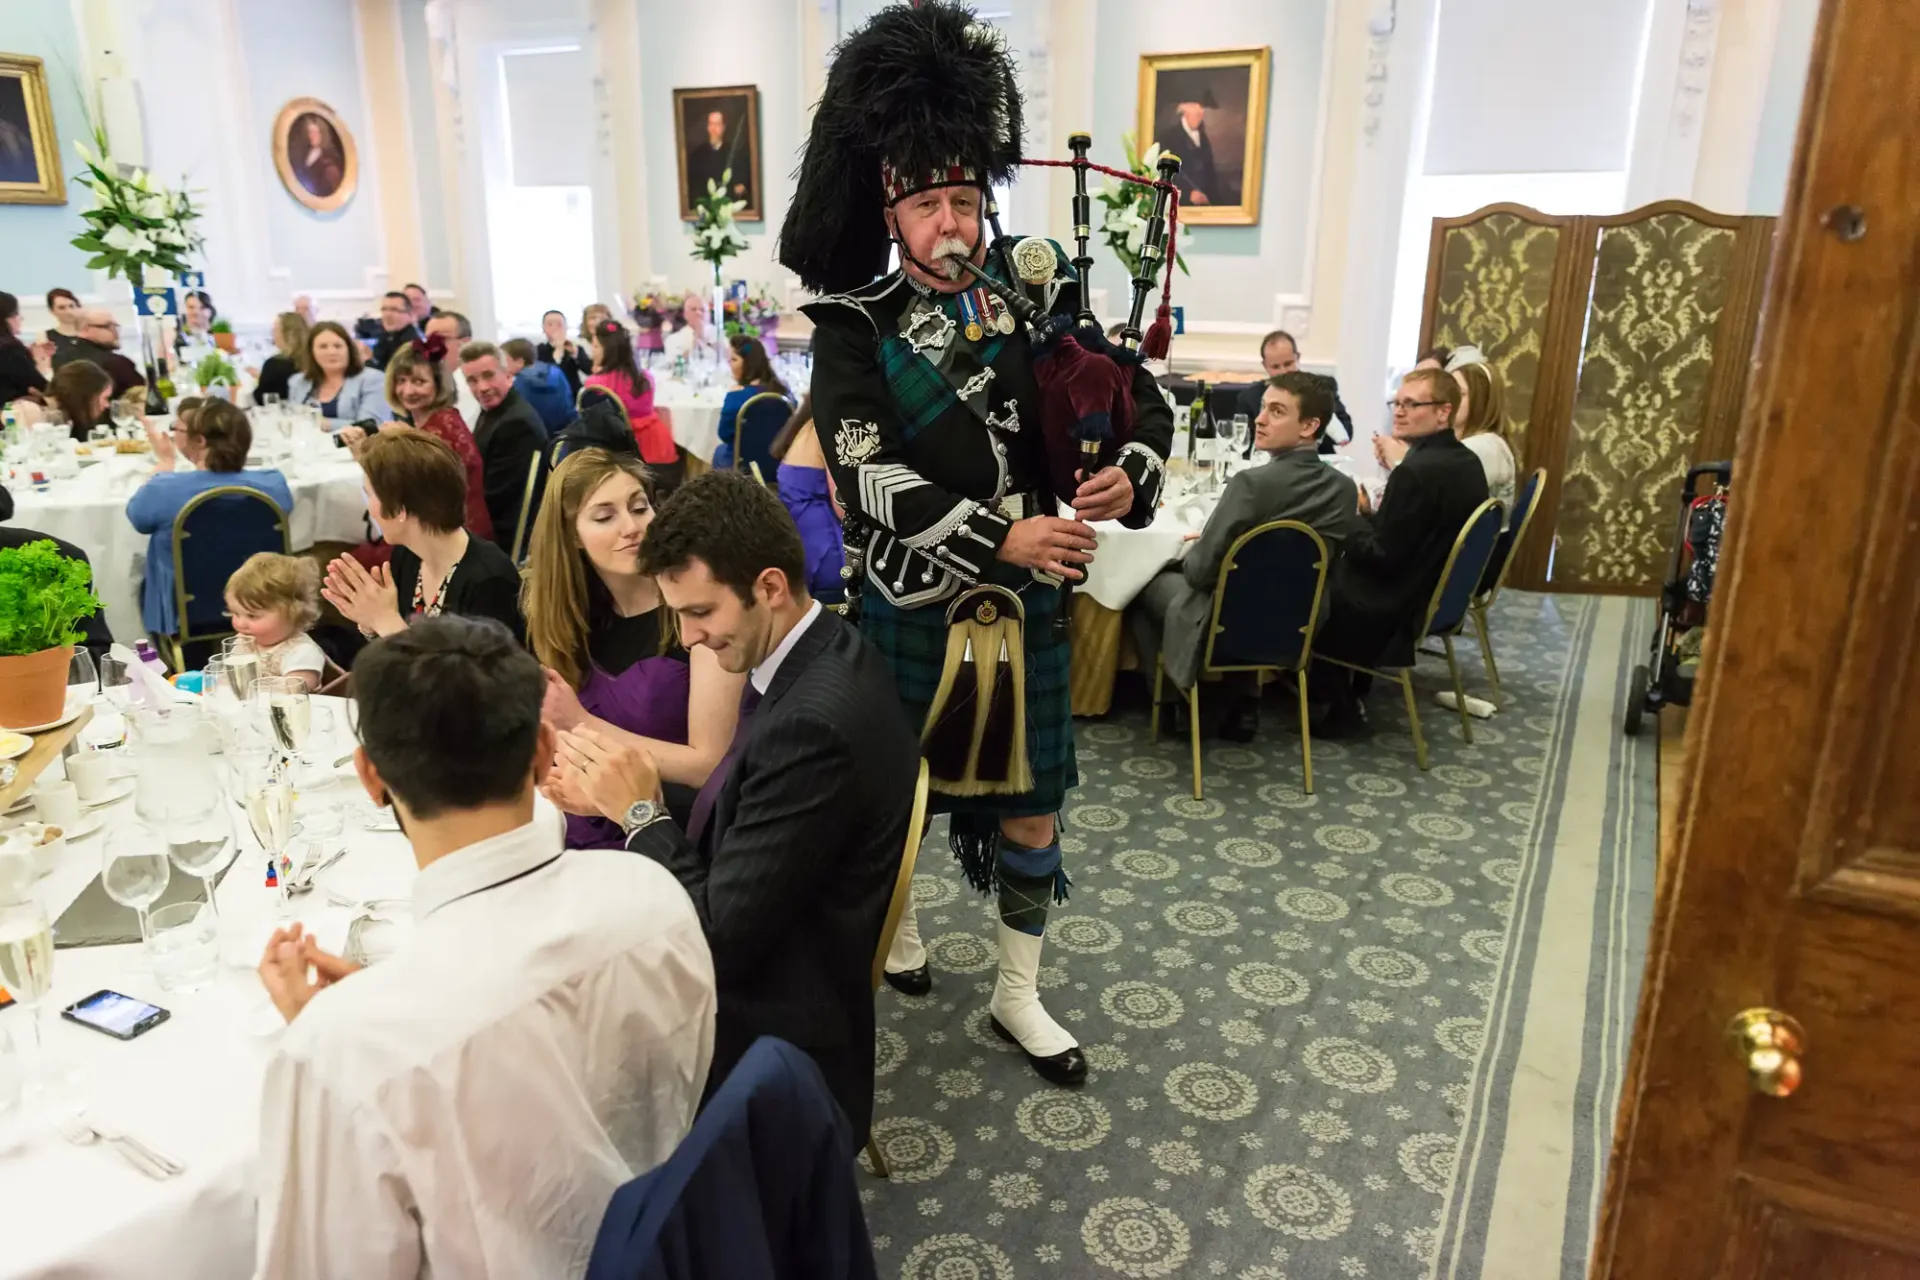 A bagpiper in traditional scottish attire playing at a formal indoor event with seated guests, some of whom are interacting warmly.